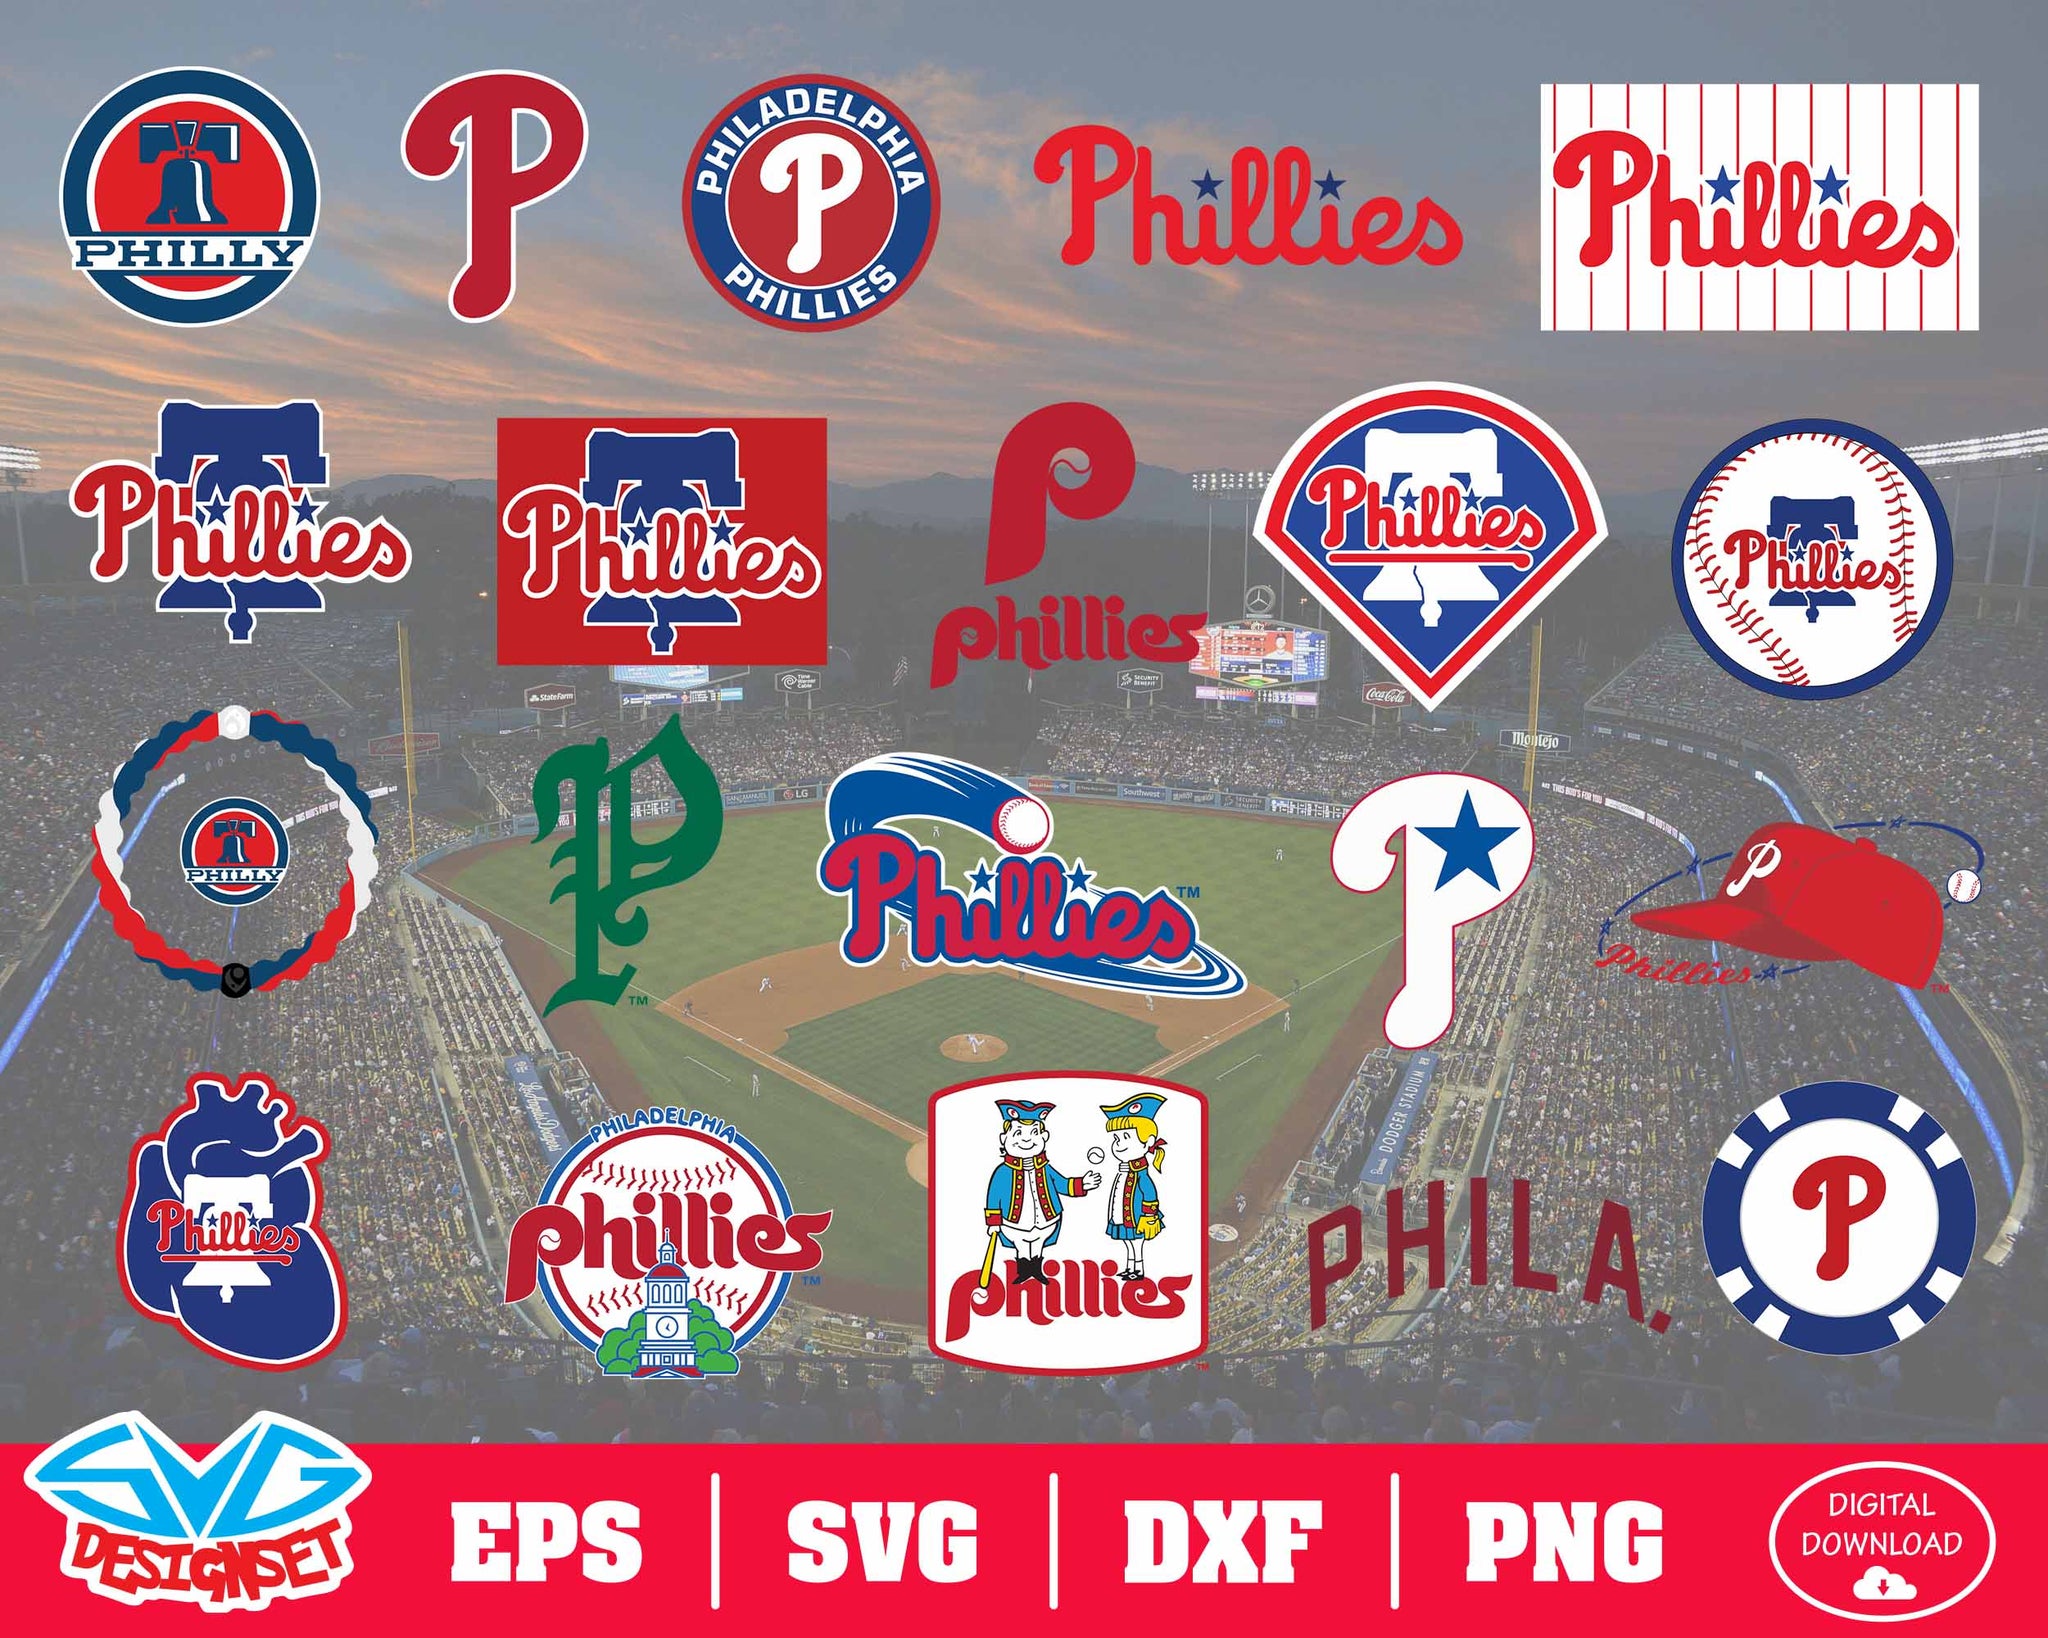 Philadelphia Phillies Team Svg, Dxf, Eps, Png, Clipart, Silhouette and Cutfiles - SVGDesignSets